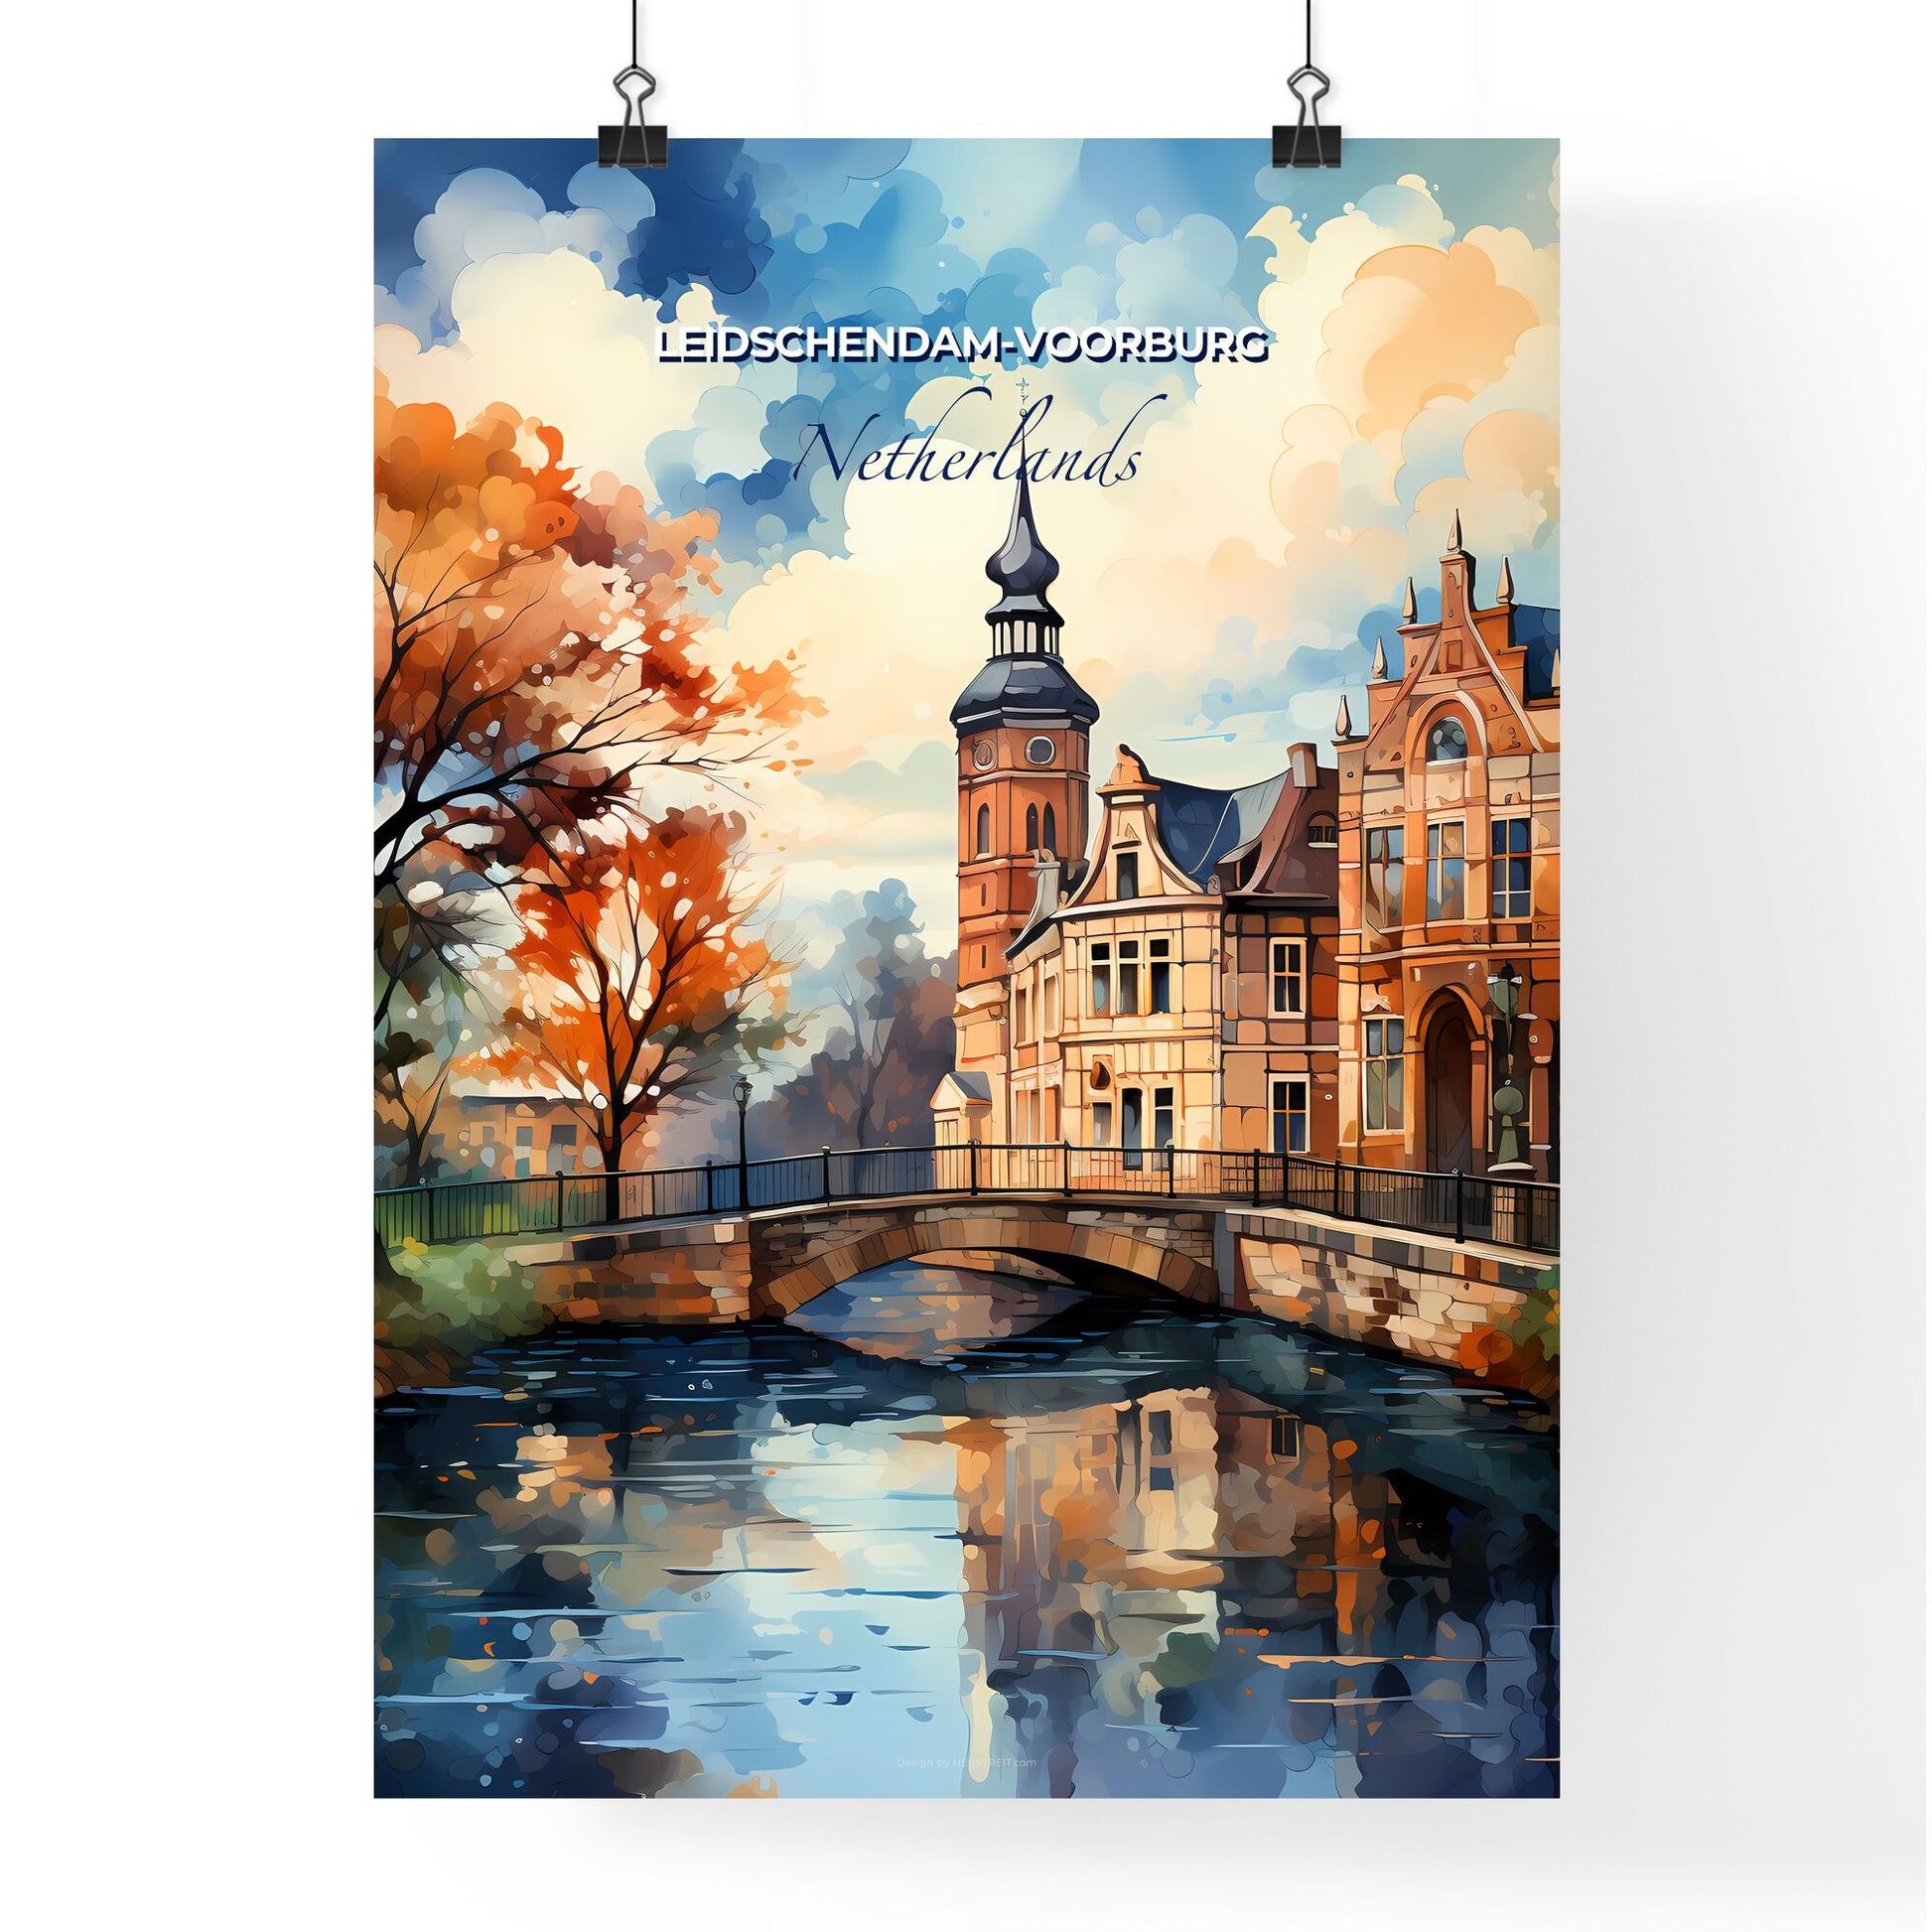 Leidschendam-Voorburg, Netherlands, A Poster of a bridge over a river with a building and trees Default Title